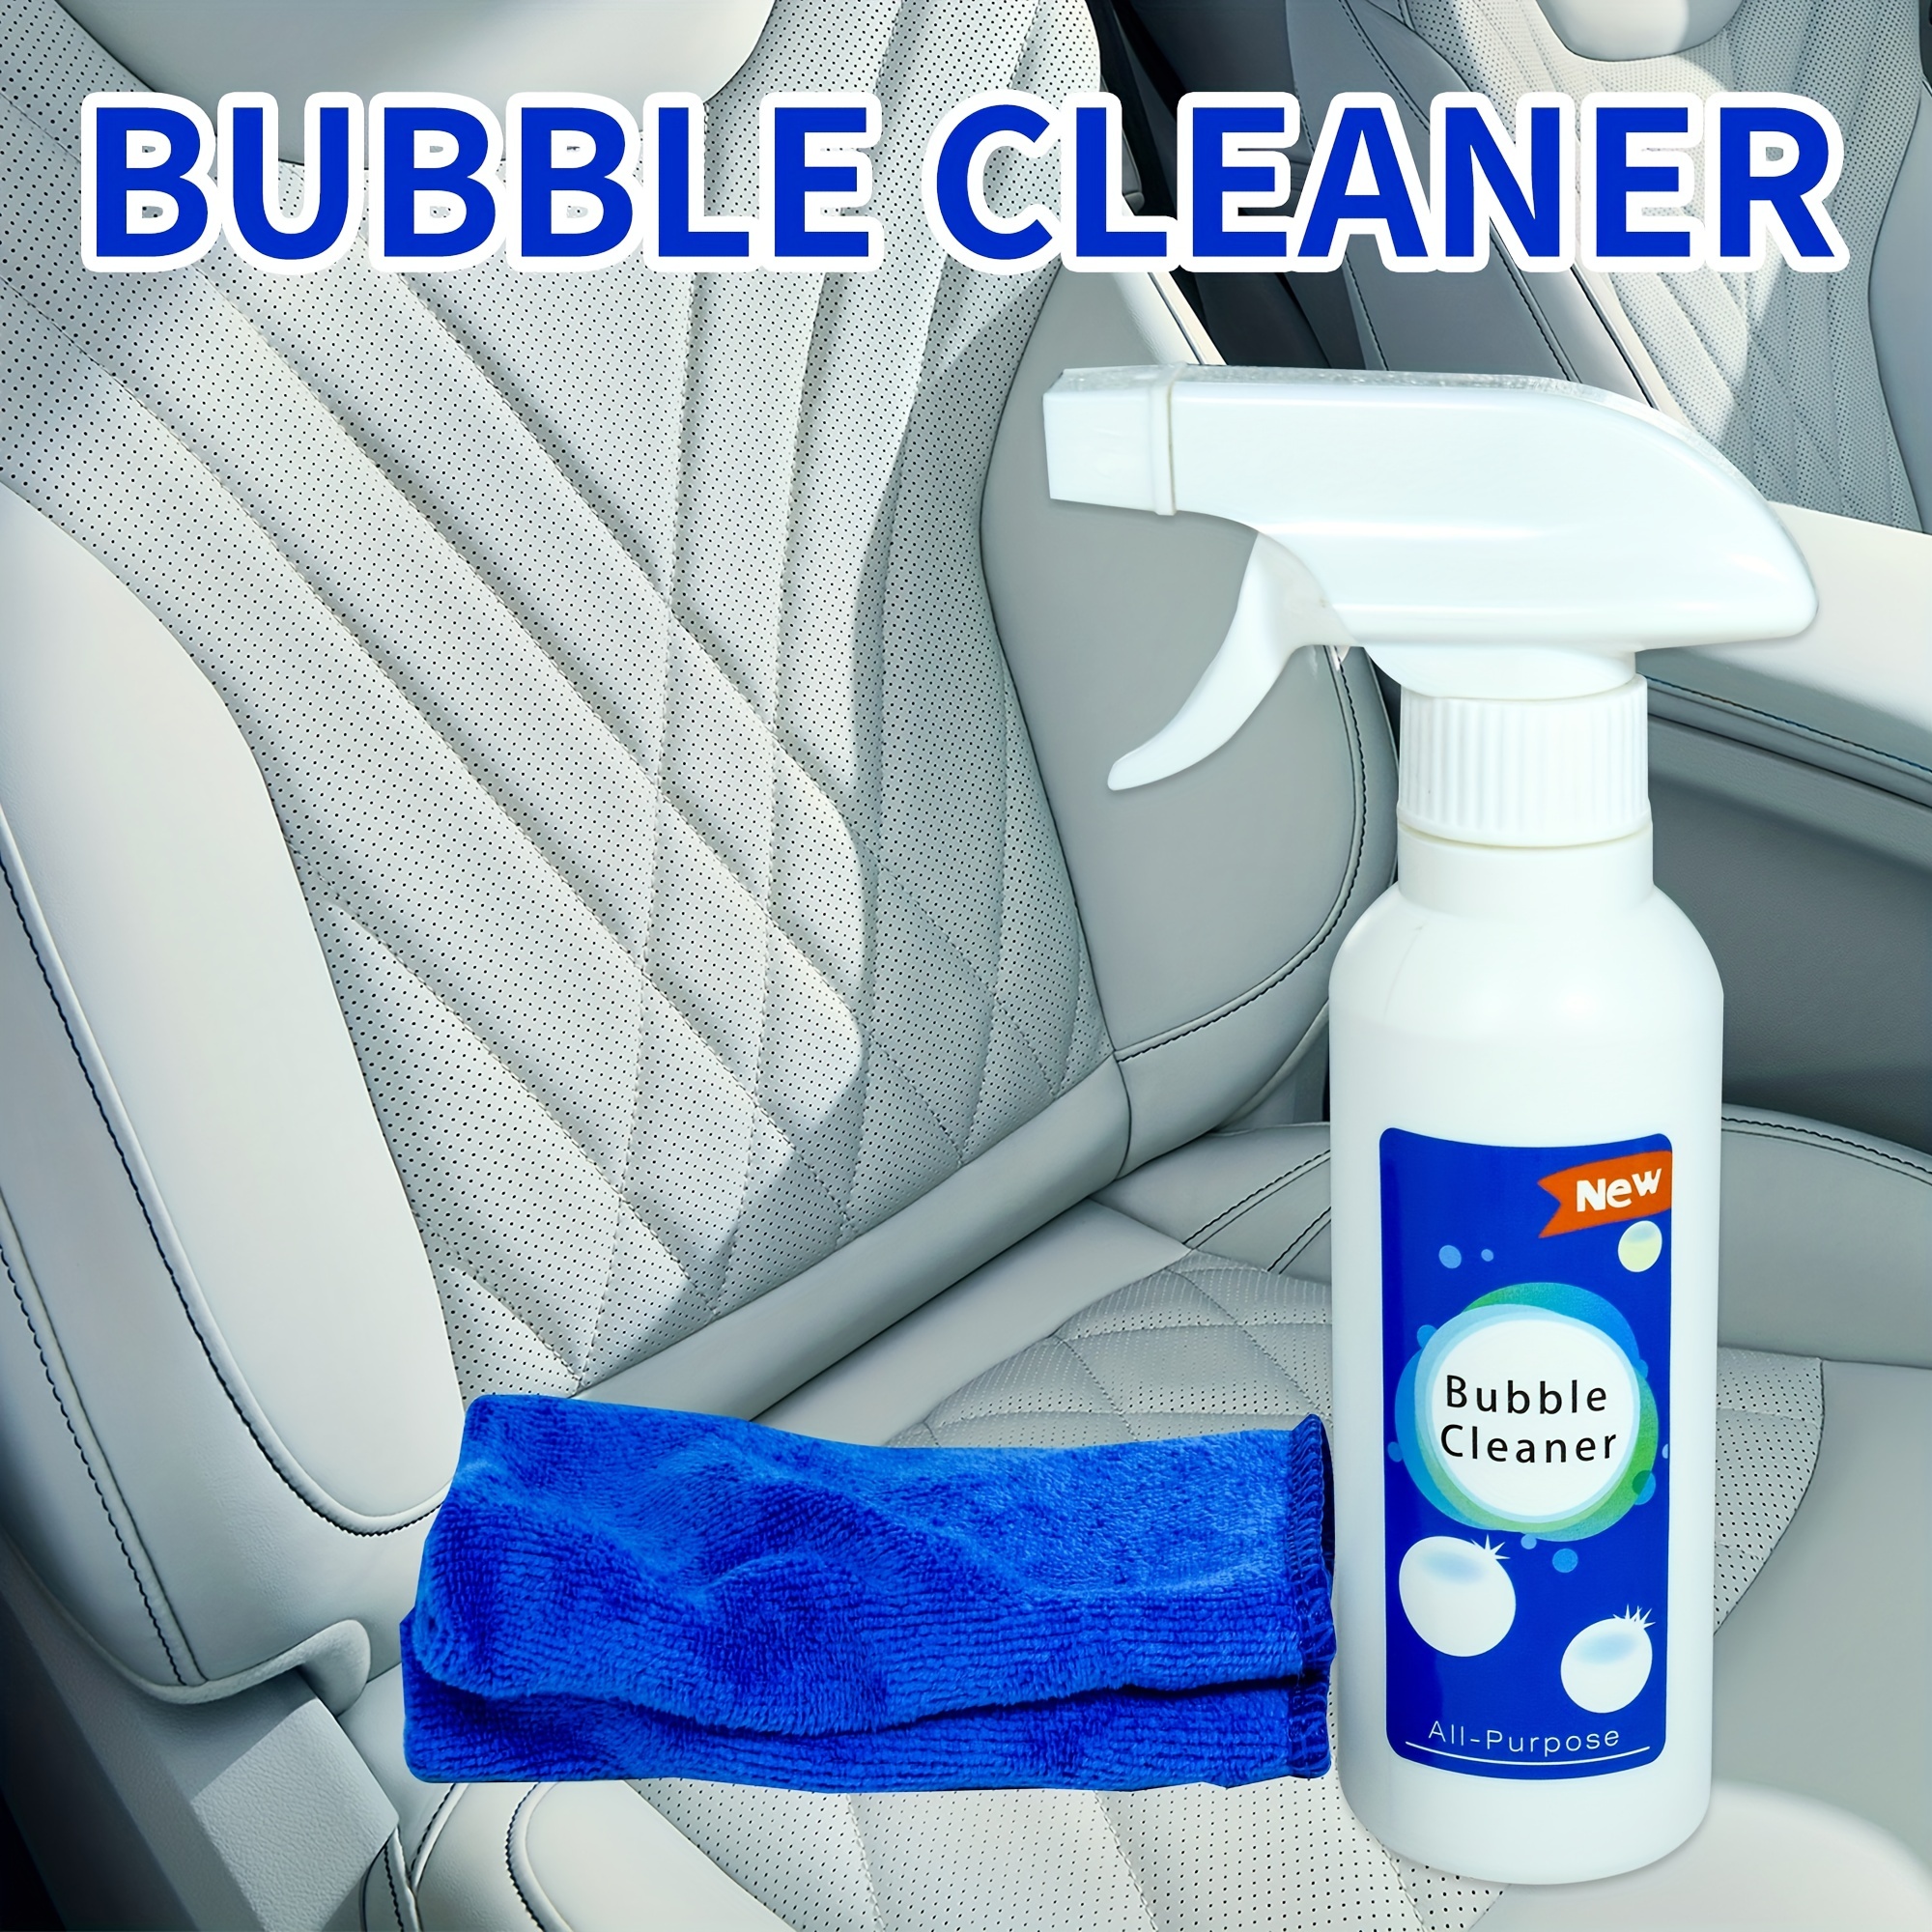 My North Moon bubble cleaner review 